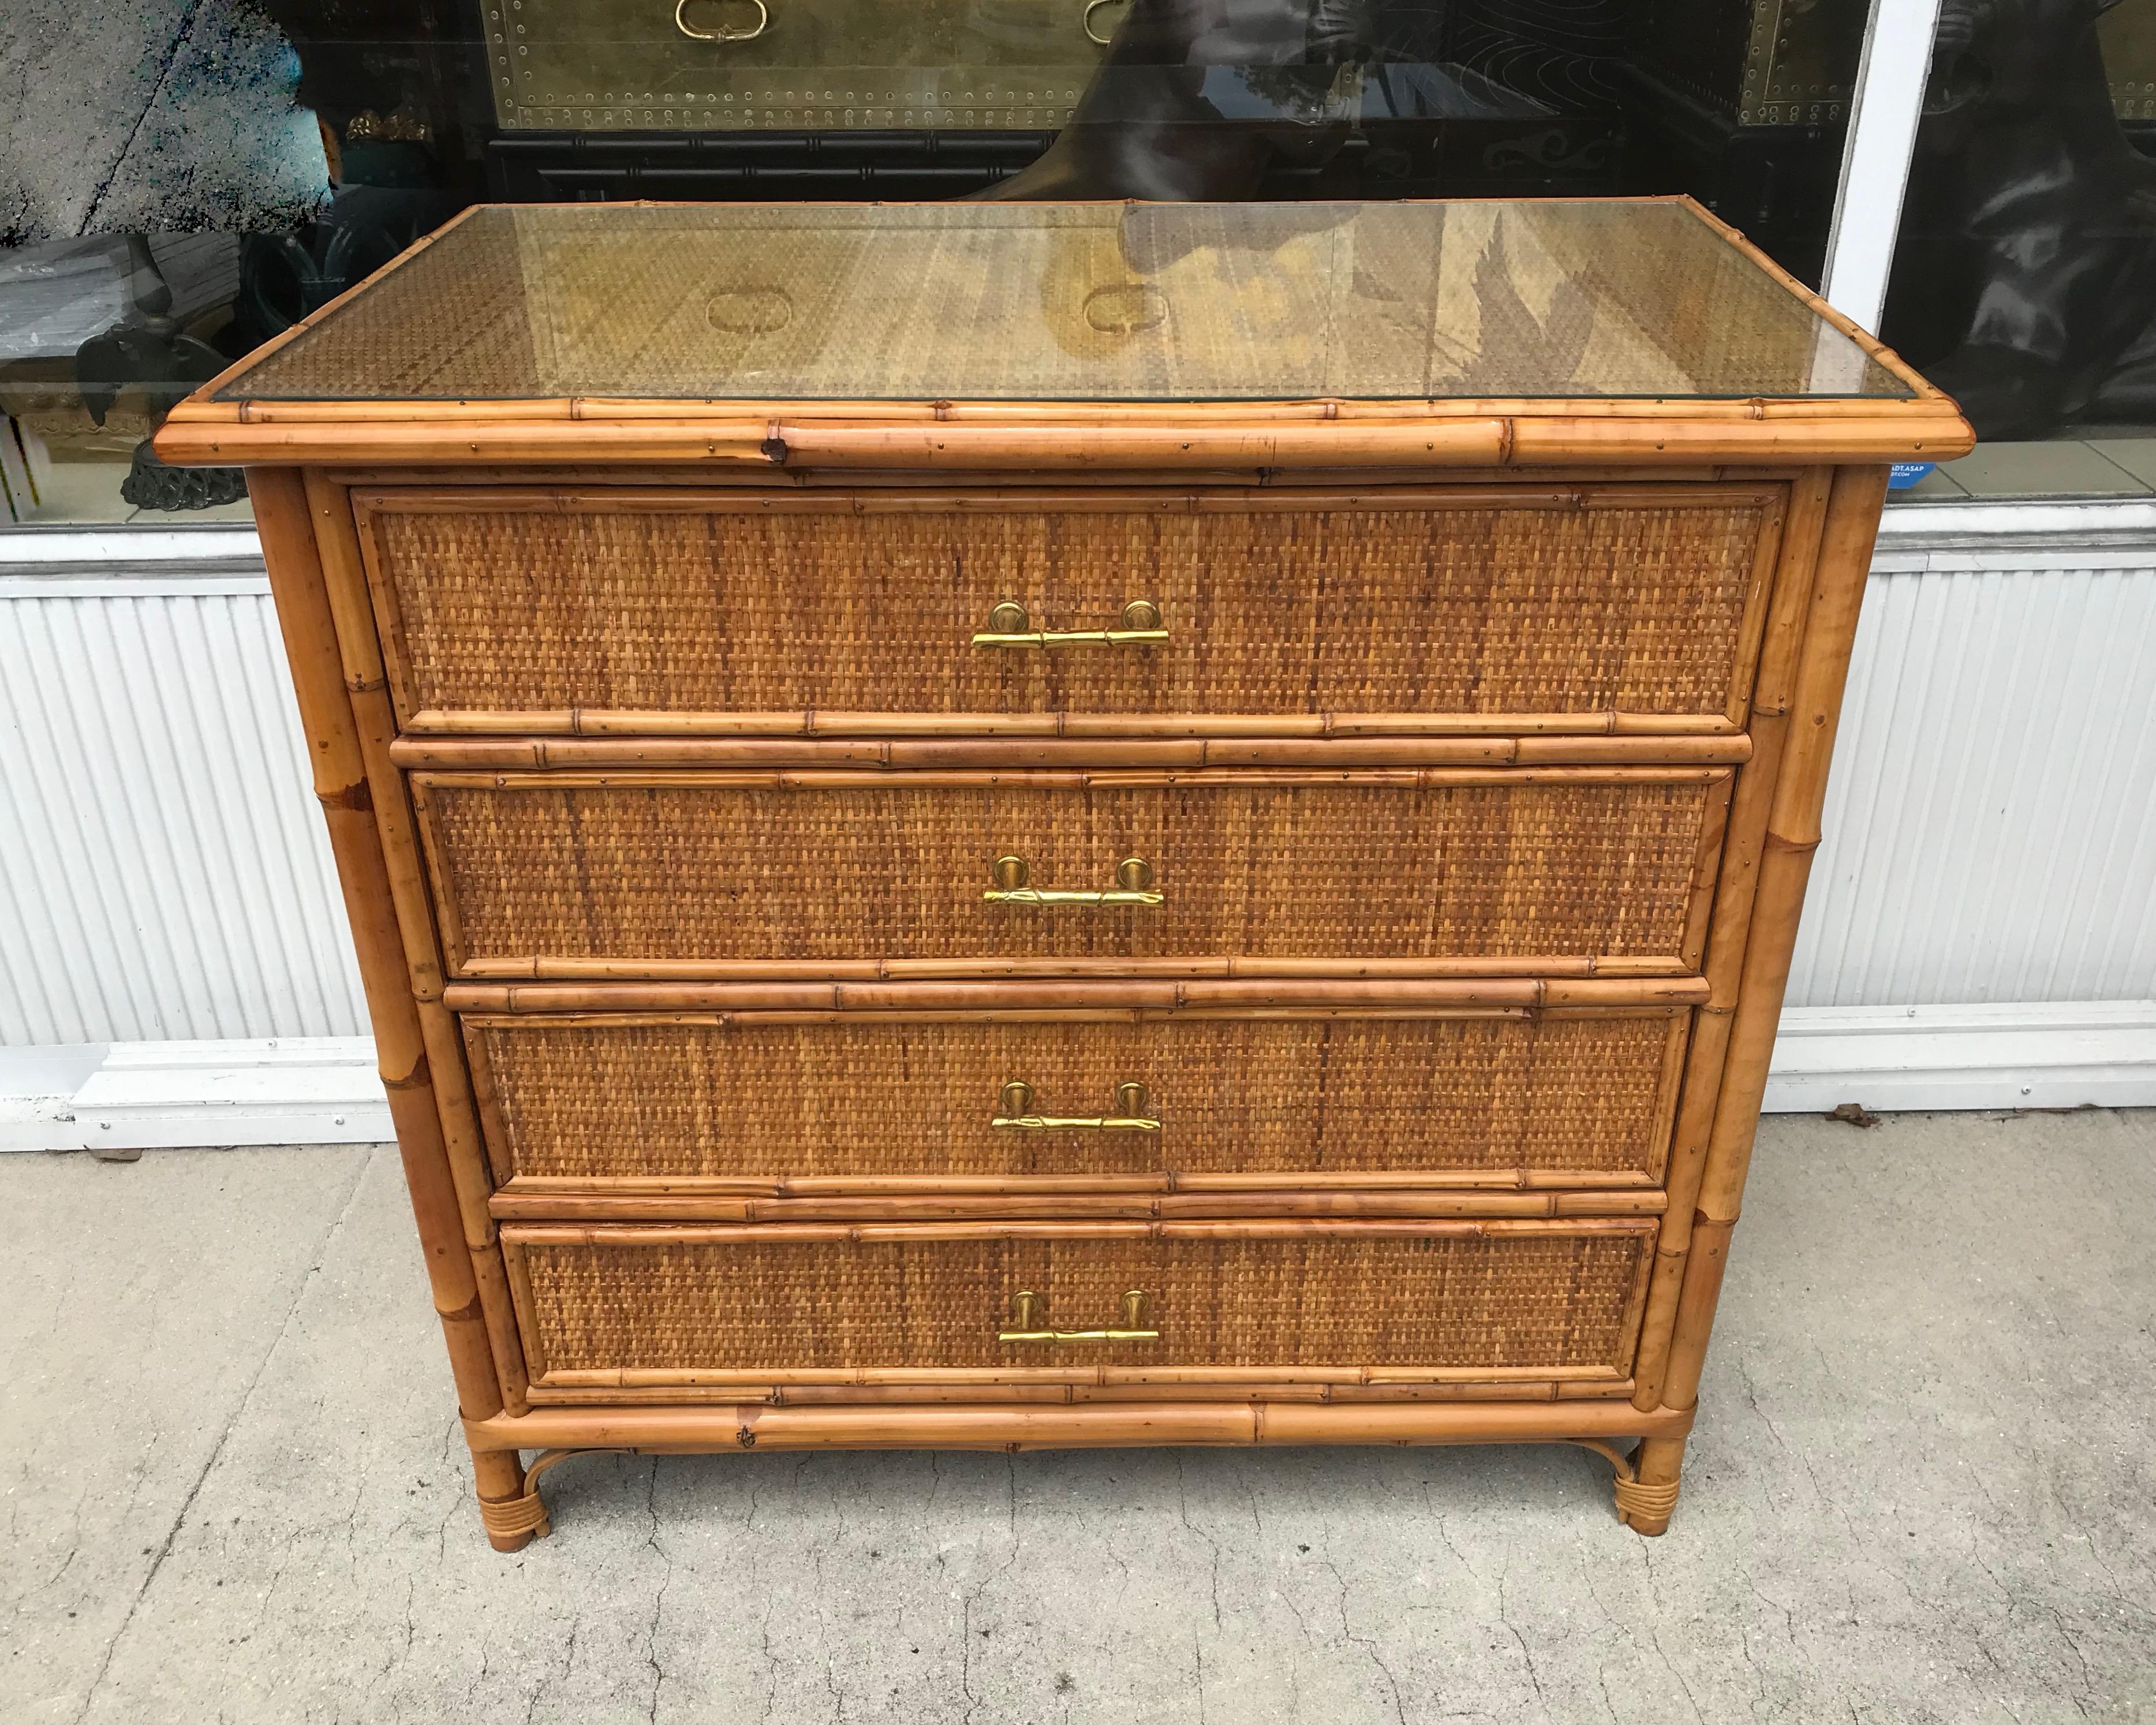 Superb quality. The piece is finished on all four sides-inset with grass
cloth. 
Bamboo trim is prominent all around. Additionally, the dresser is accented
with bamboo like handles fashioned in brass. A superb example.
( the top has a removable